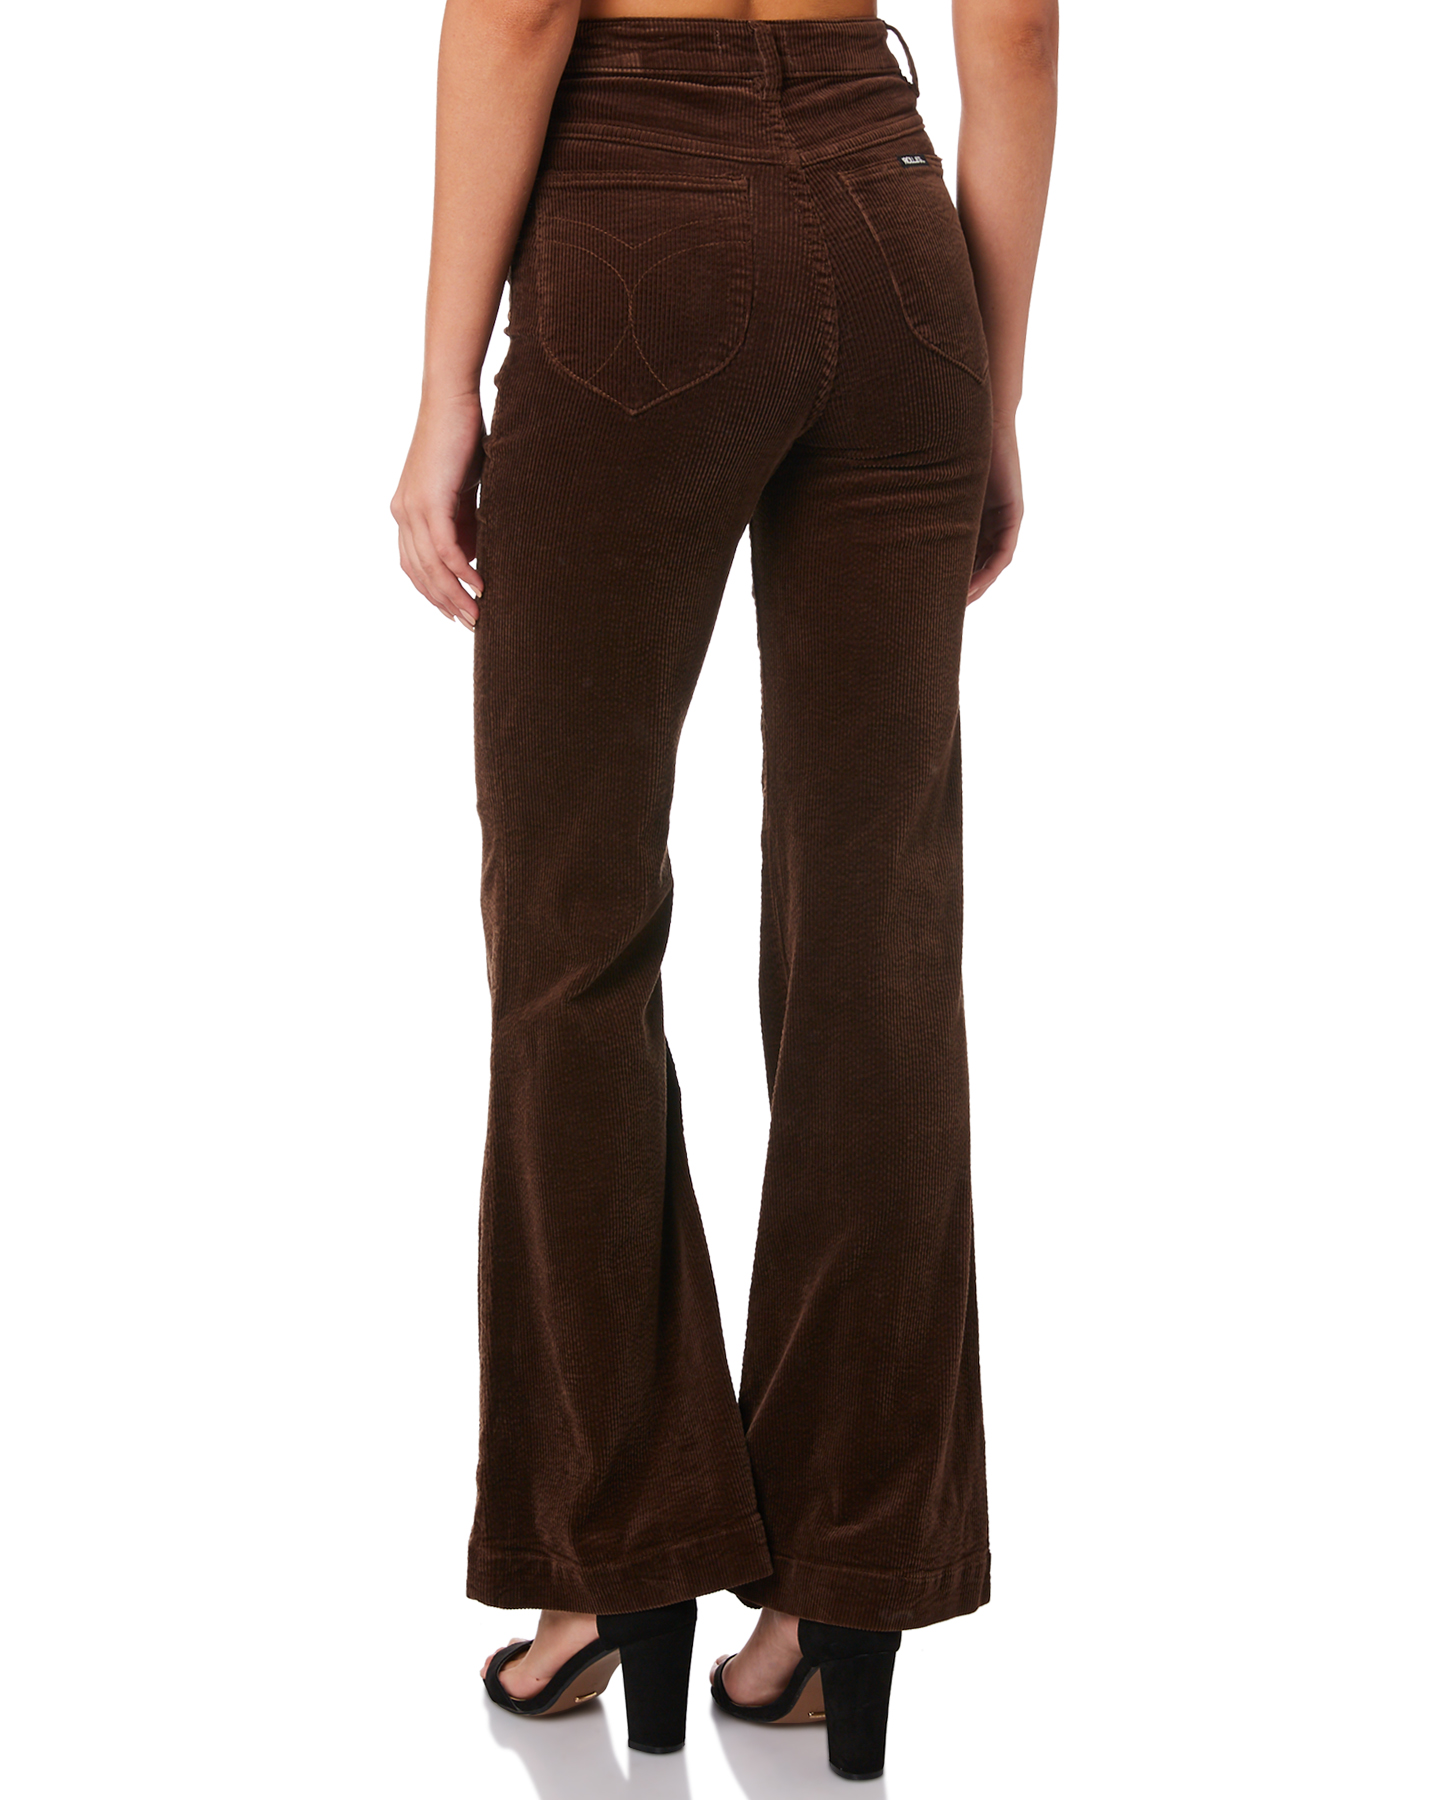 Rollas Eastcoast Flare Jean - Brown Cord | SurfStitch